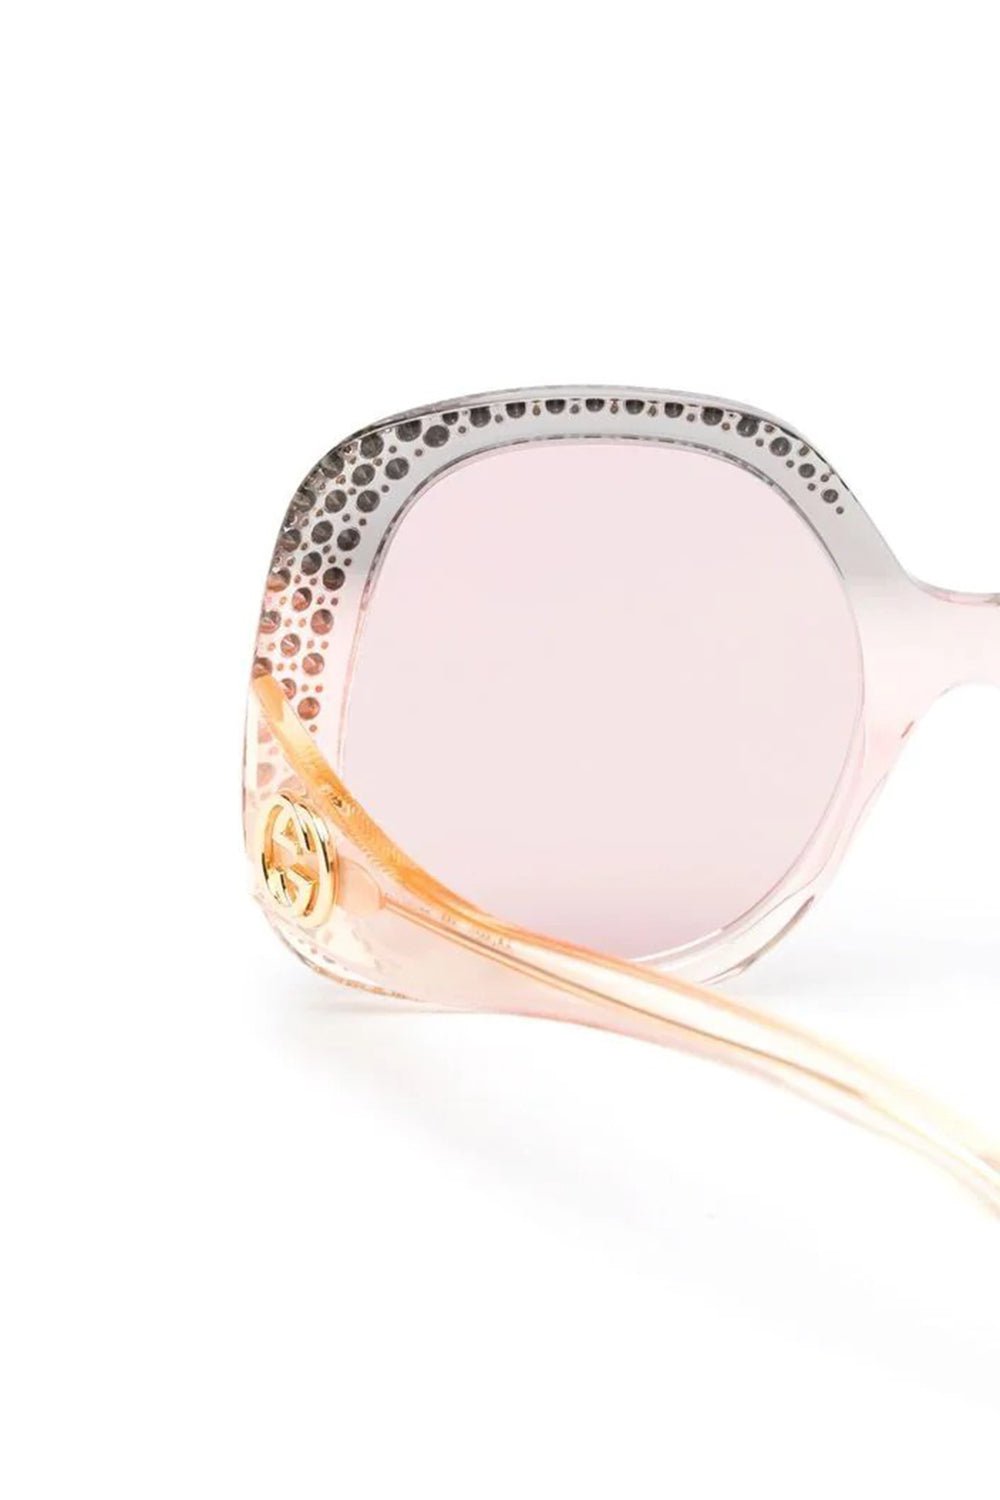 GUCCI-Oval Frame Sunglasses-GREY/YELLOW/PINK